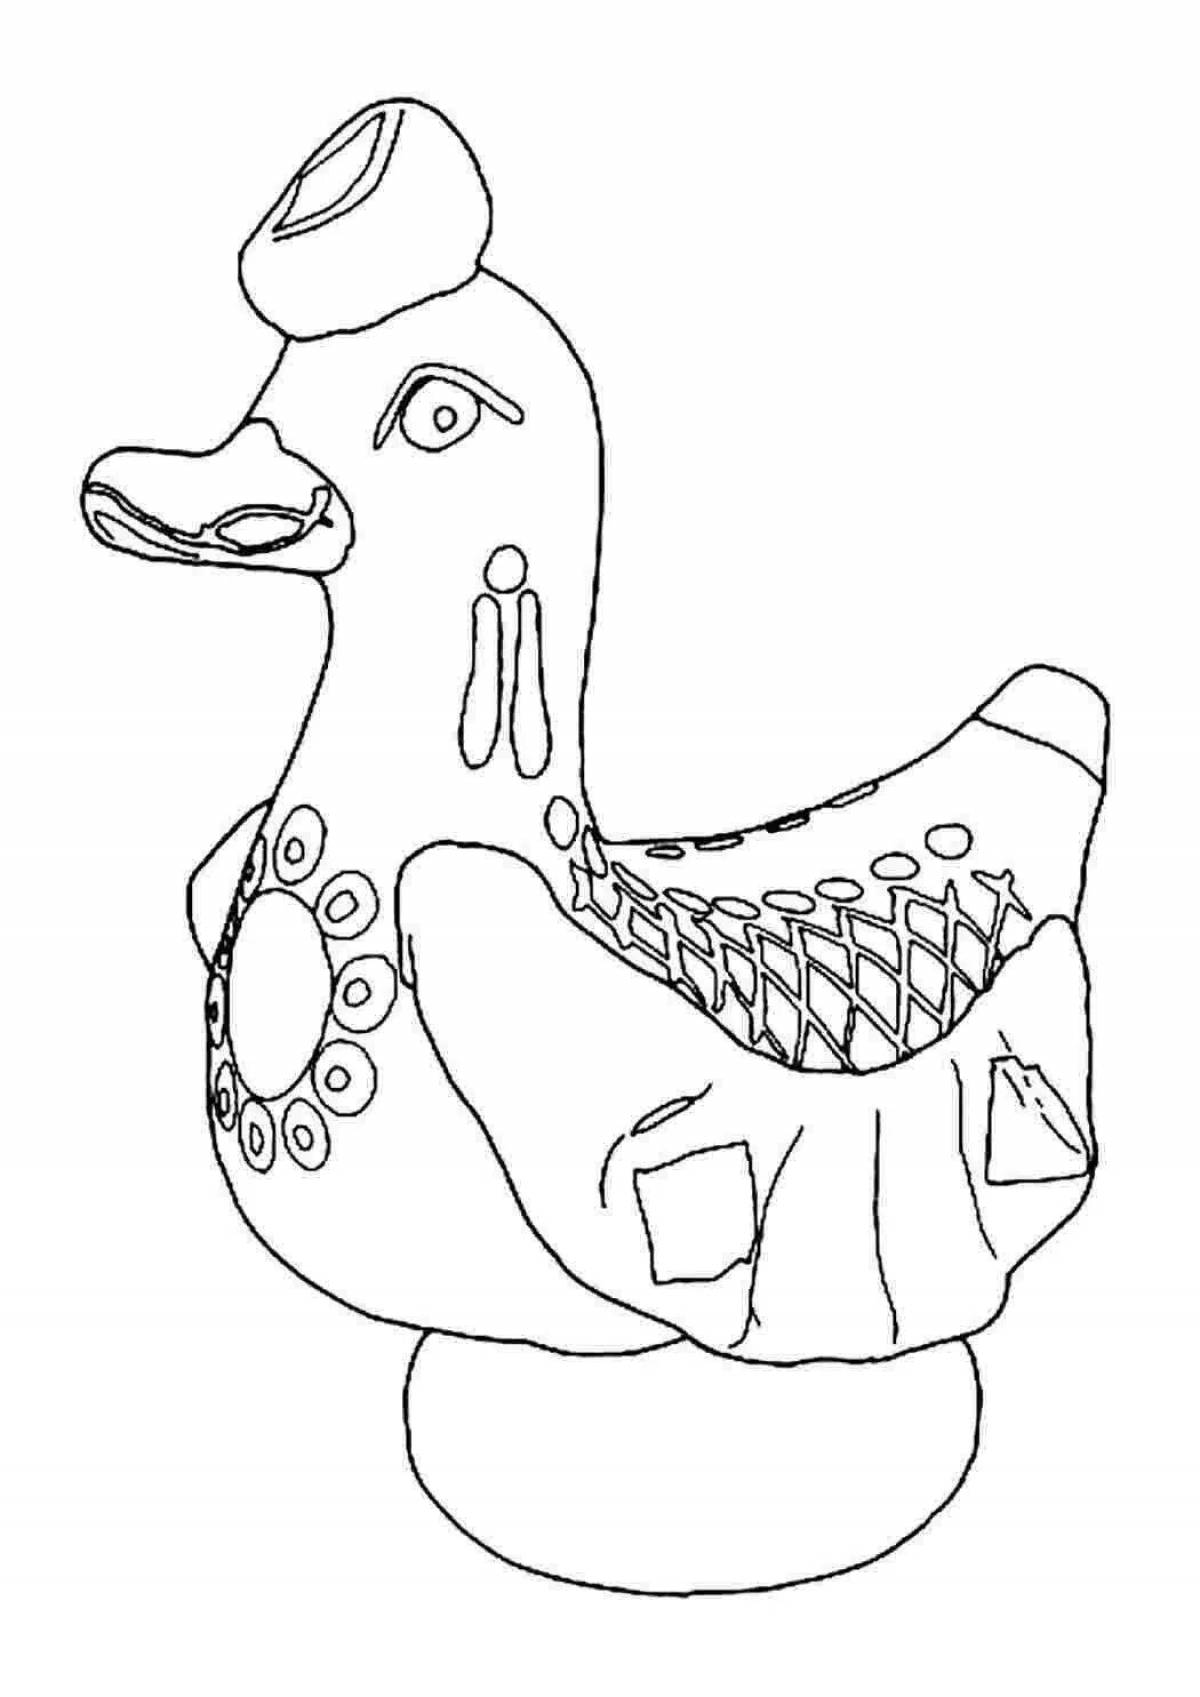 Creative Dymkovo toy duck coloring book for 3-4 year olds